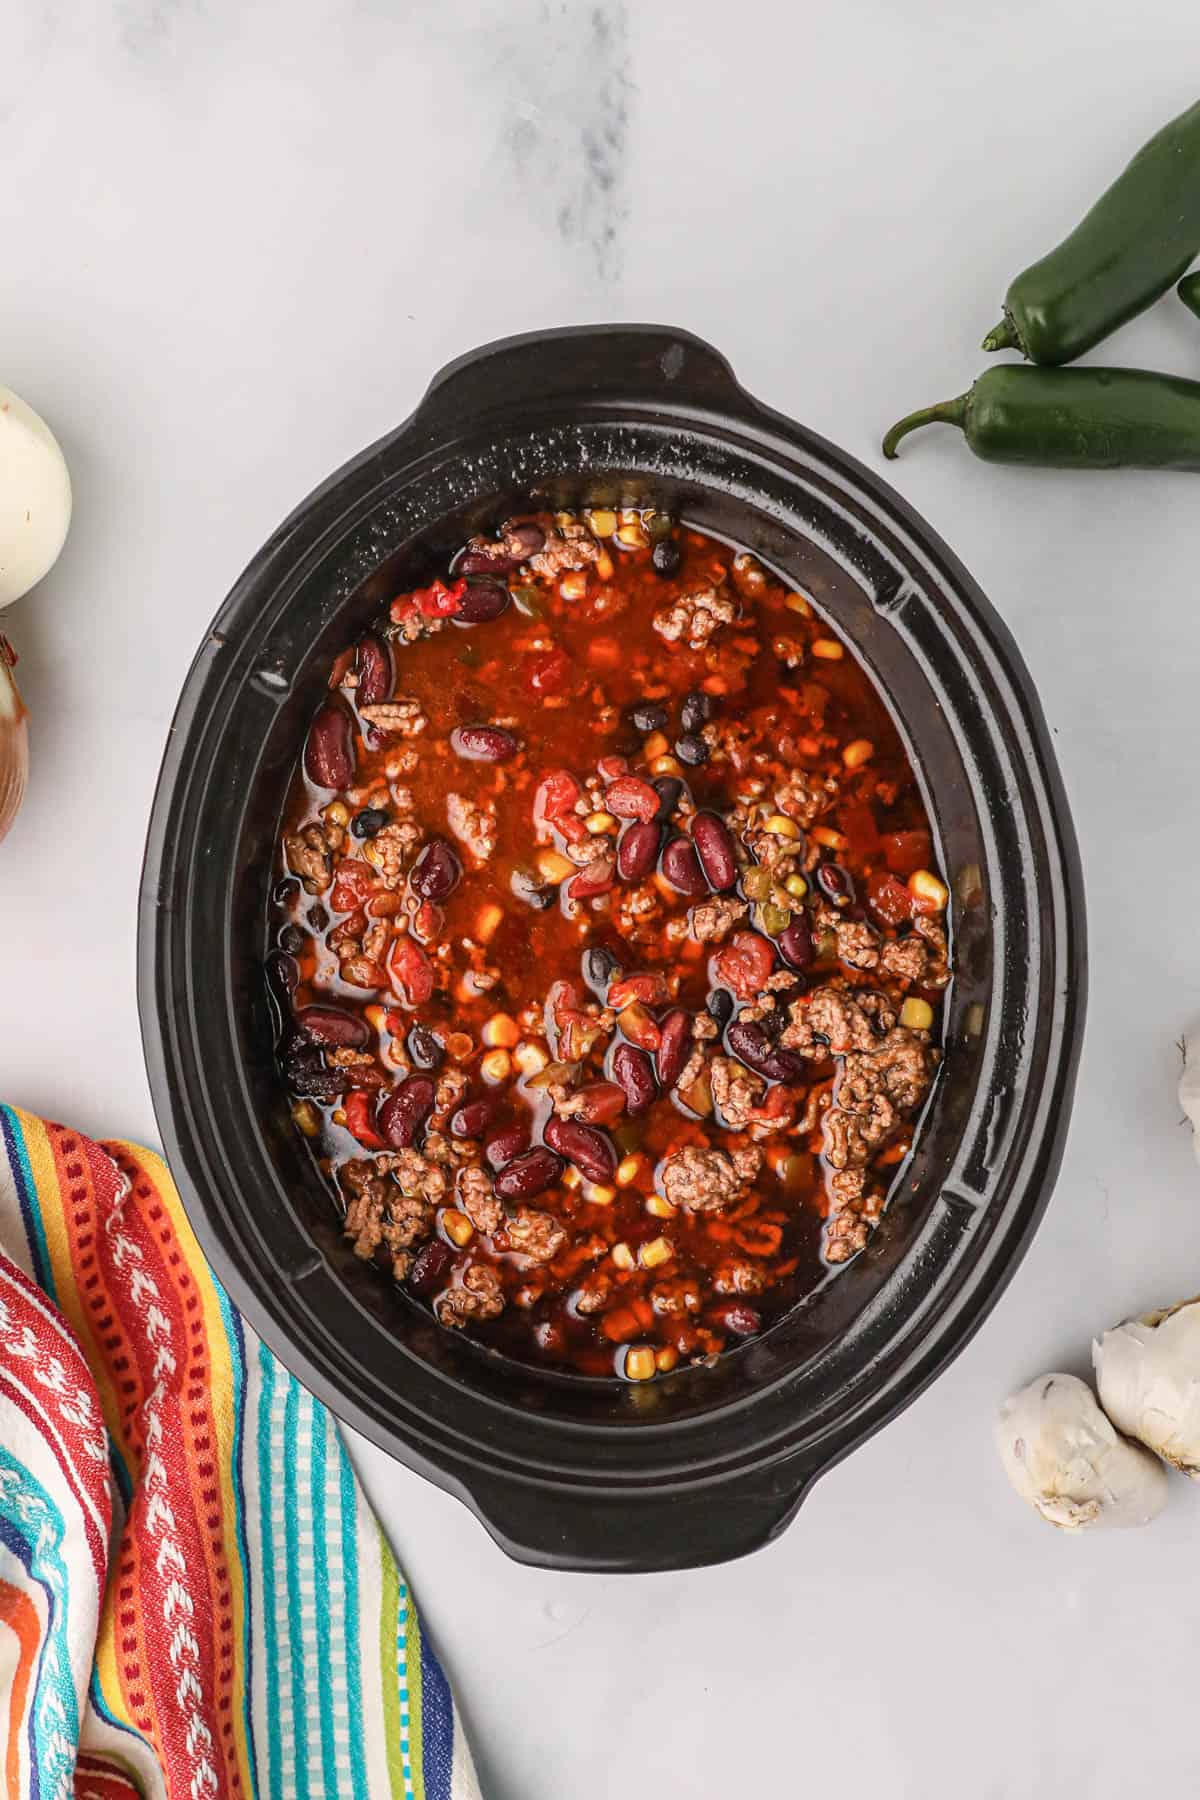 Mixed taco soup ingredients in a slow cooker.